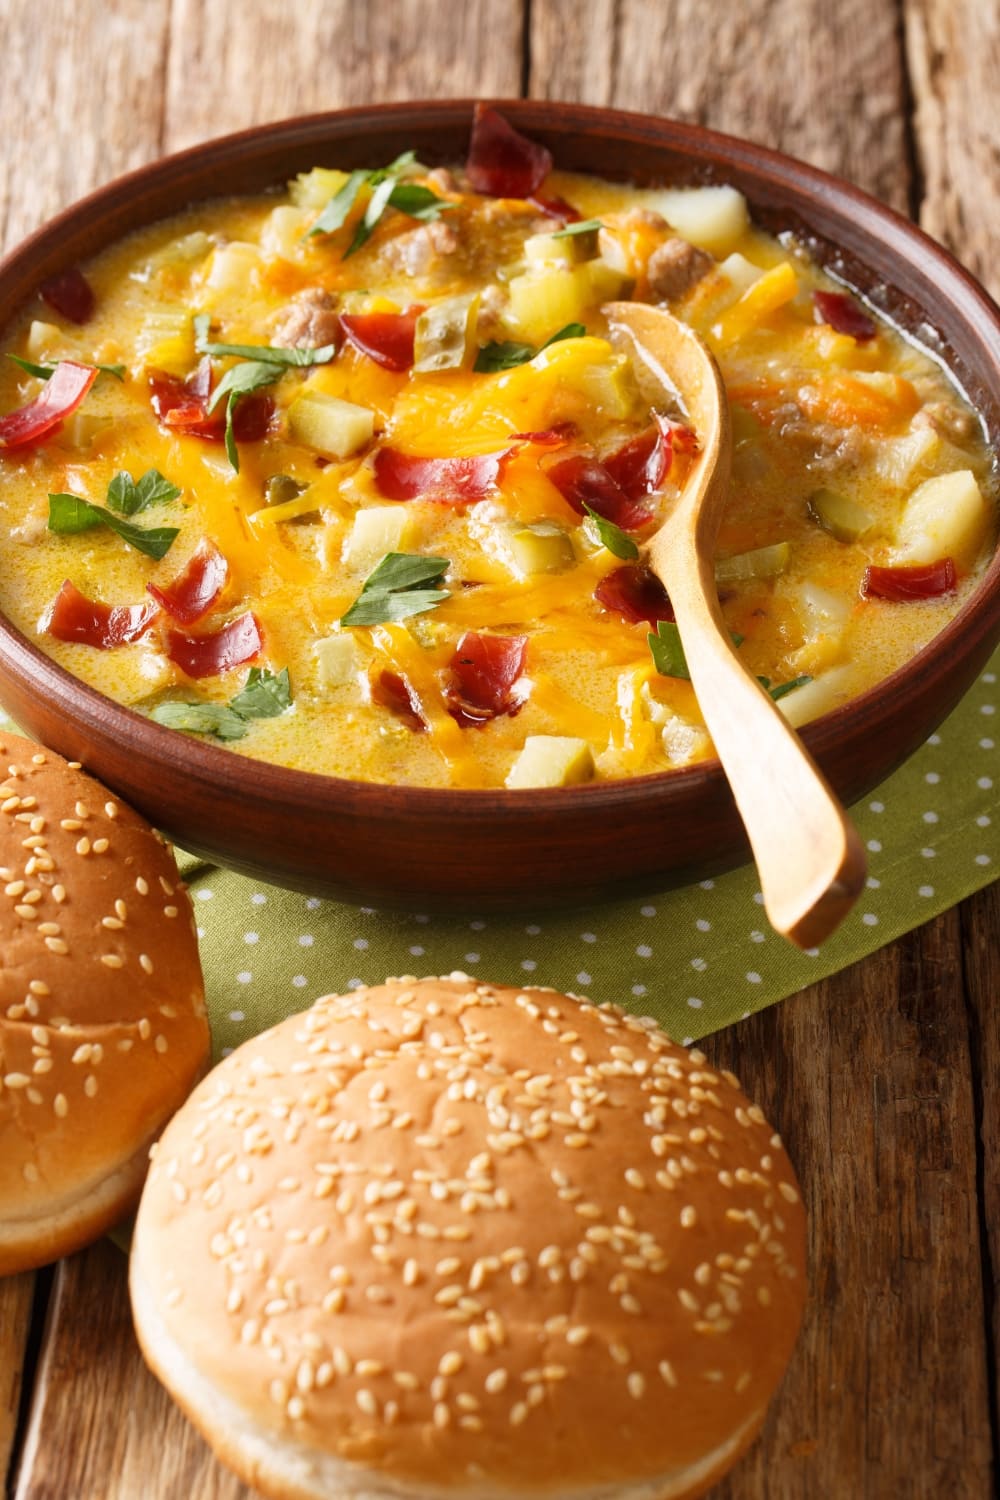 Creamy, Cheesy Cheeseburger Soup and Buns on Sides